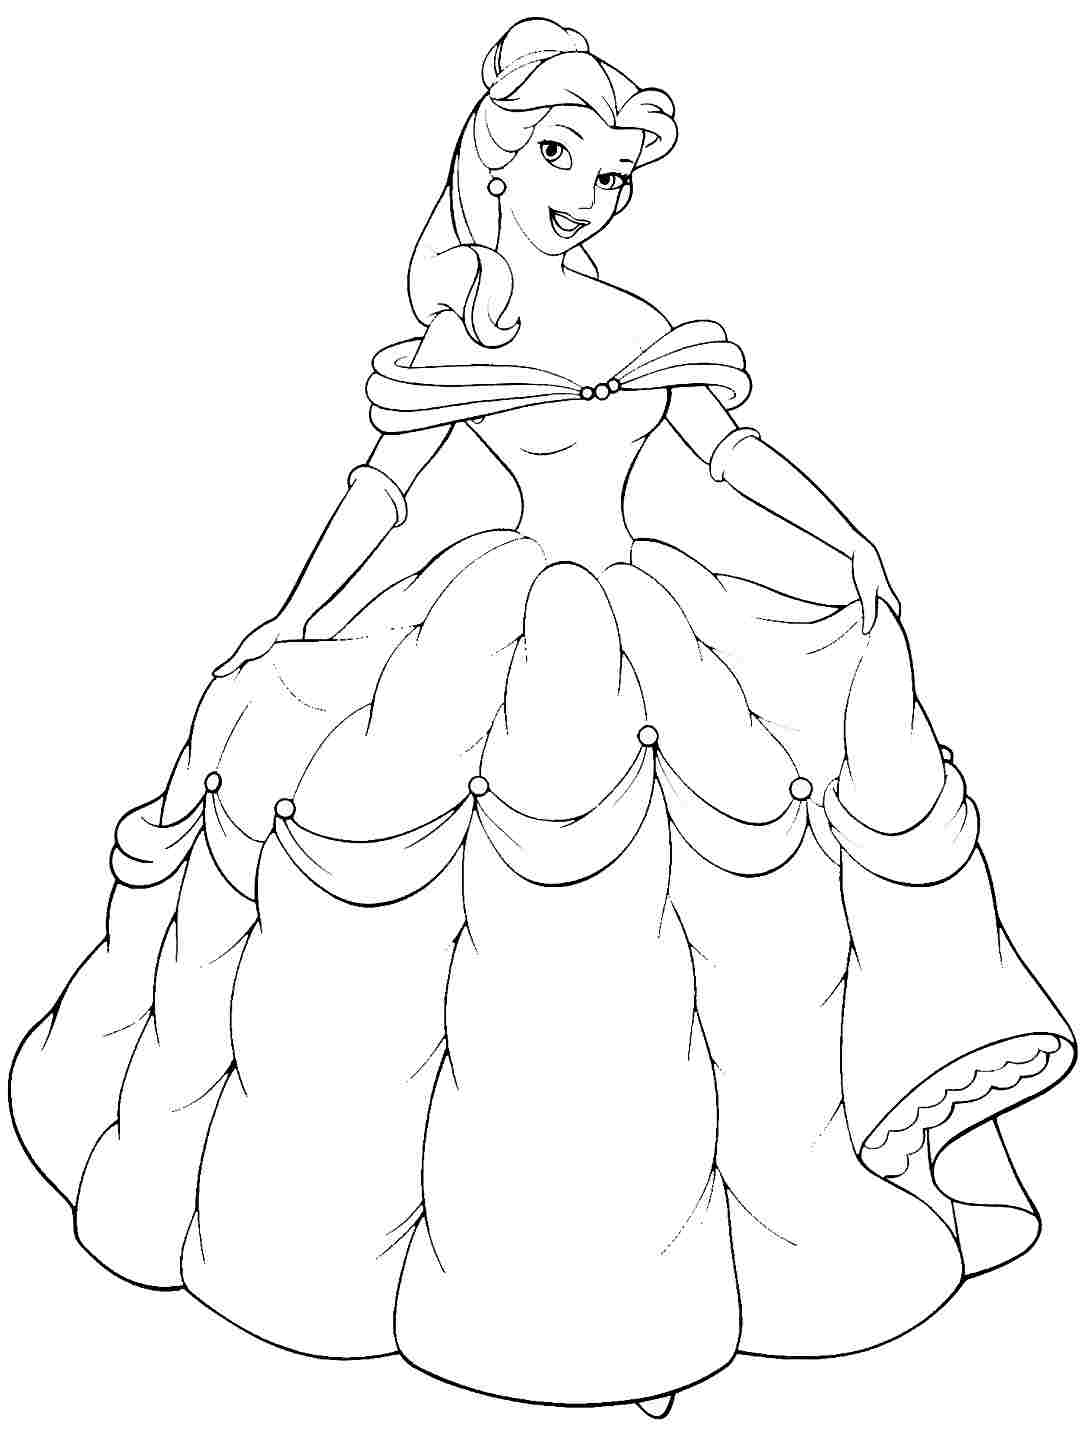 Princess belle coloring pages to download and print for free